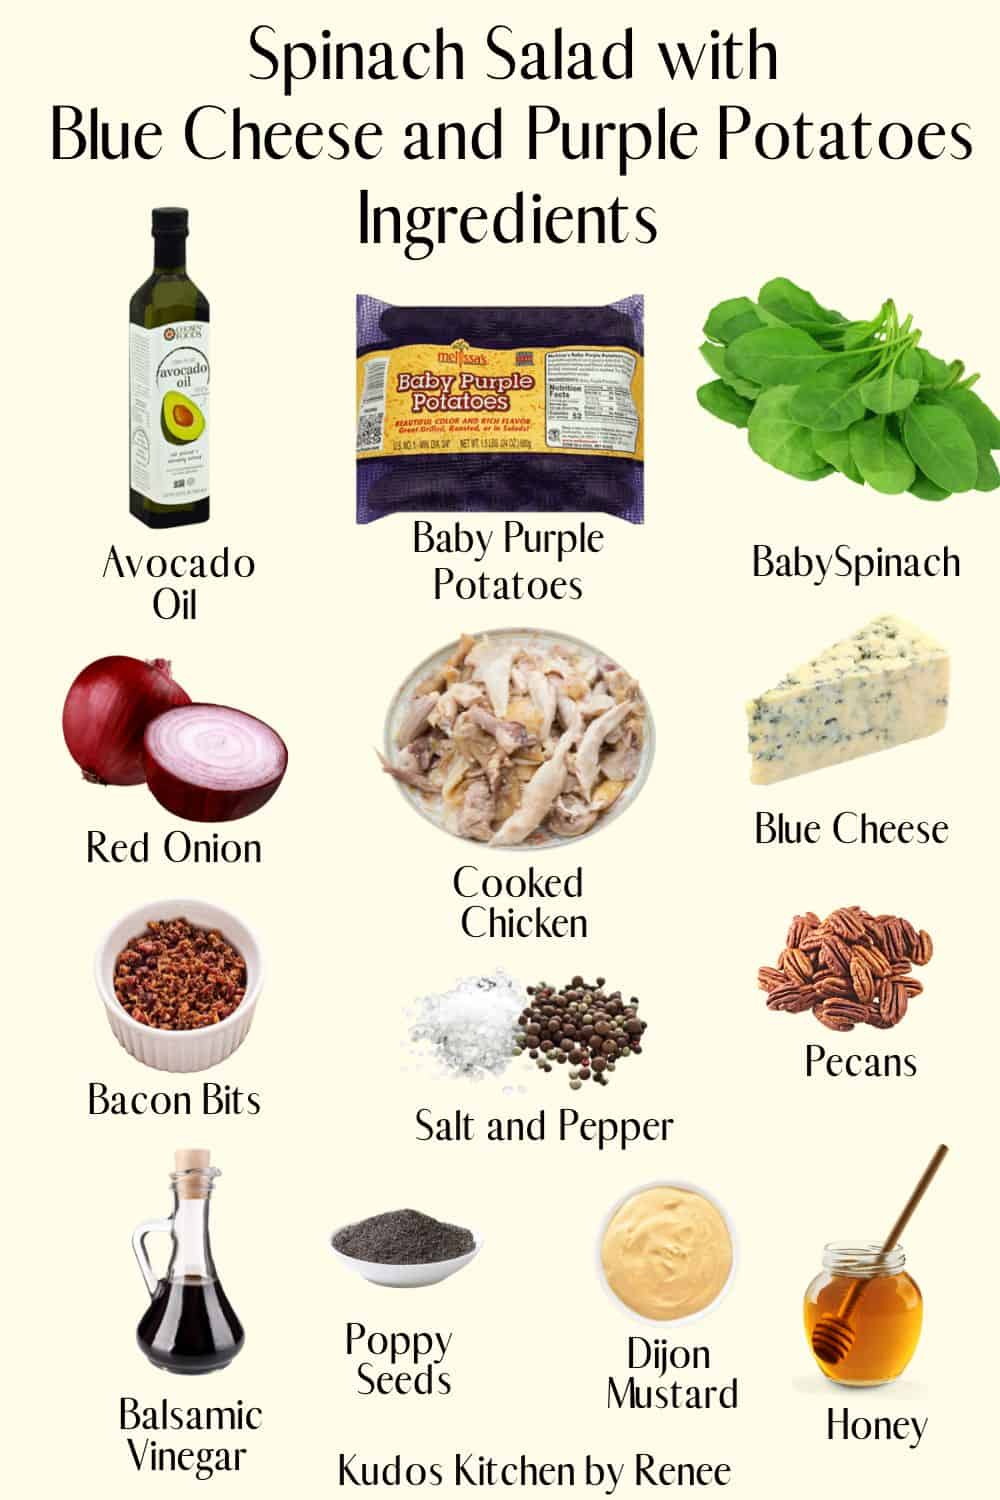 Visual ingredient list for making Spinach Salad with Blue Cheese and Purple Potatoes.